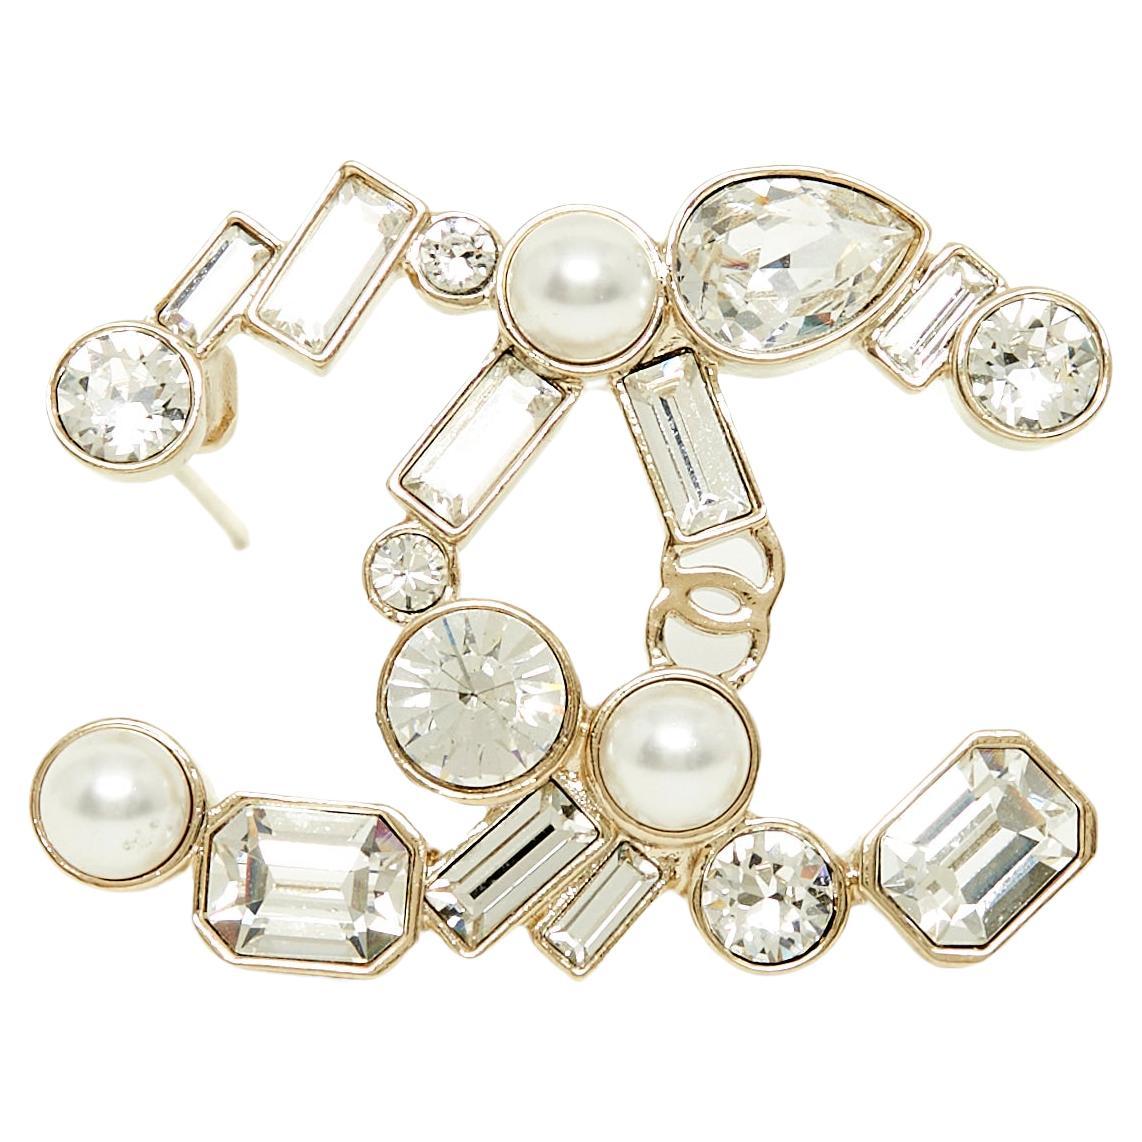 FW2021 Chanel Inrregular Fancy diamonds and Pearls Brooch For Sale